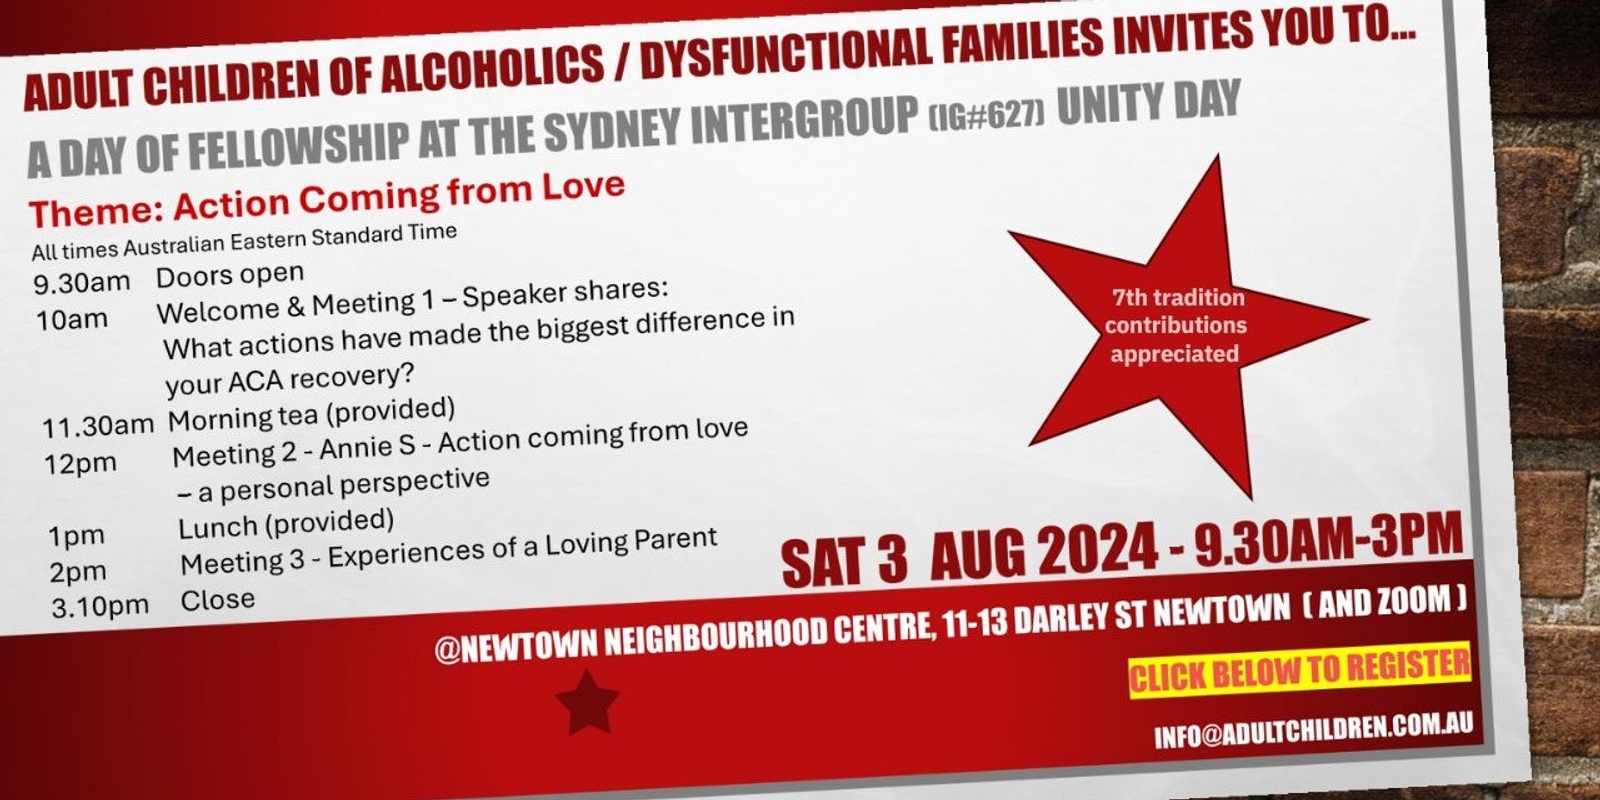 Banner image for Adult Children of Alcoholics & Dysfunctional Families Sydney Unity Day